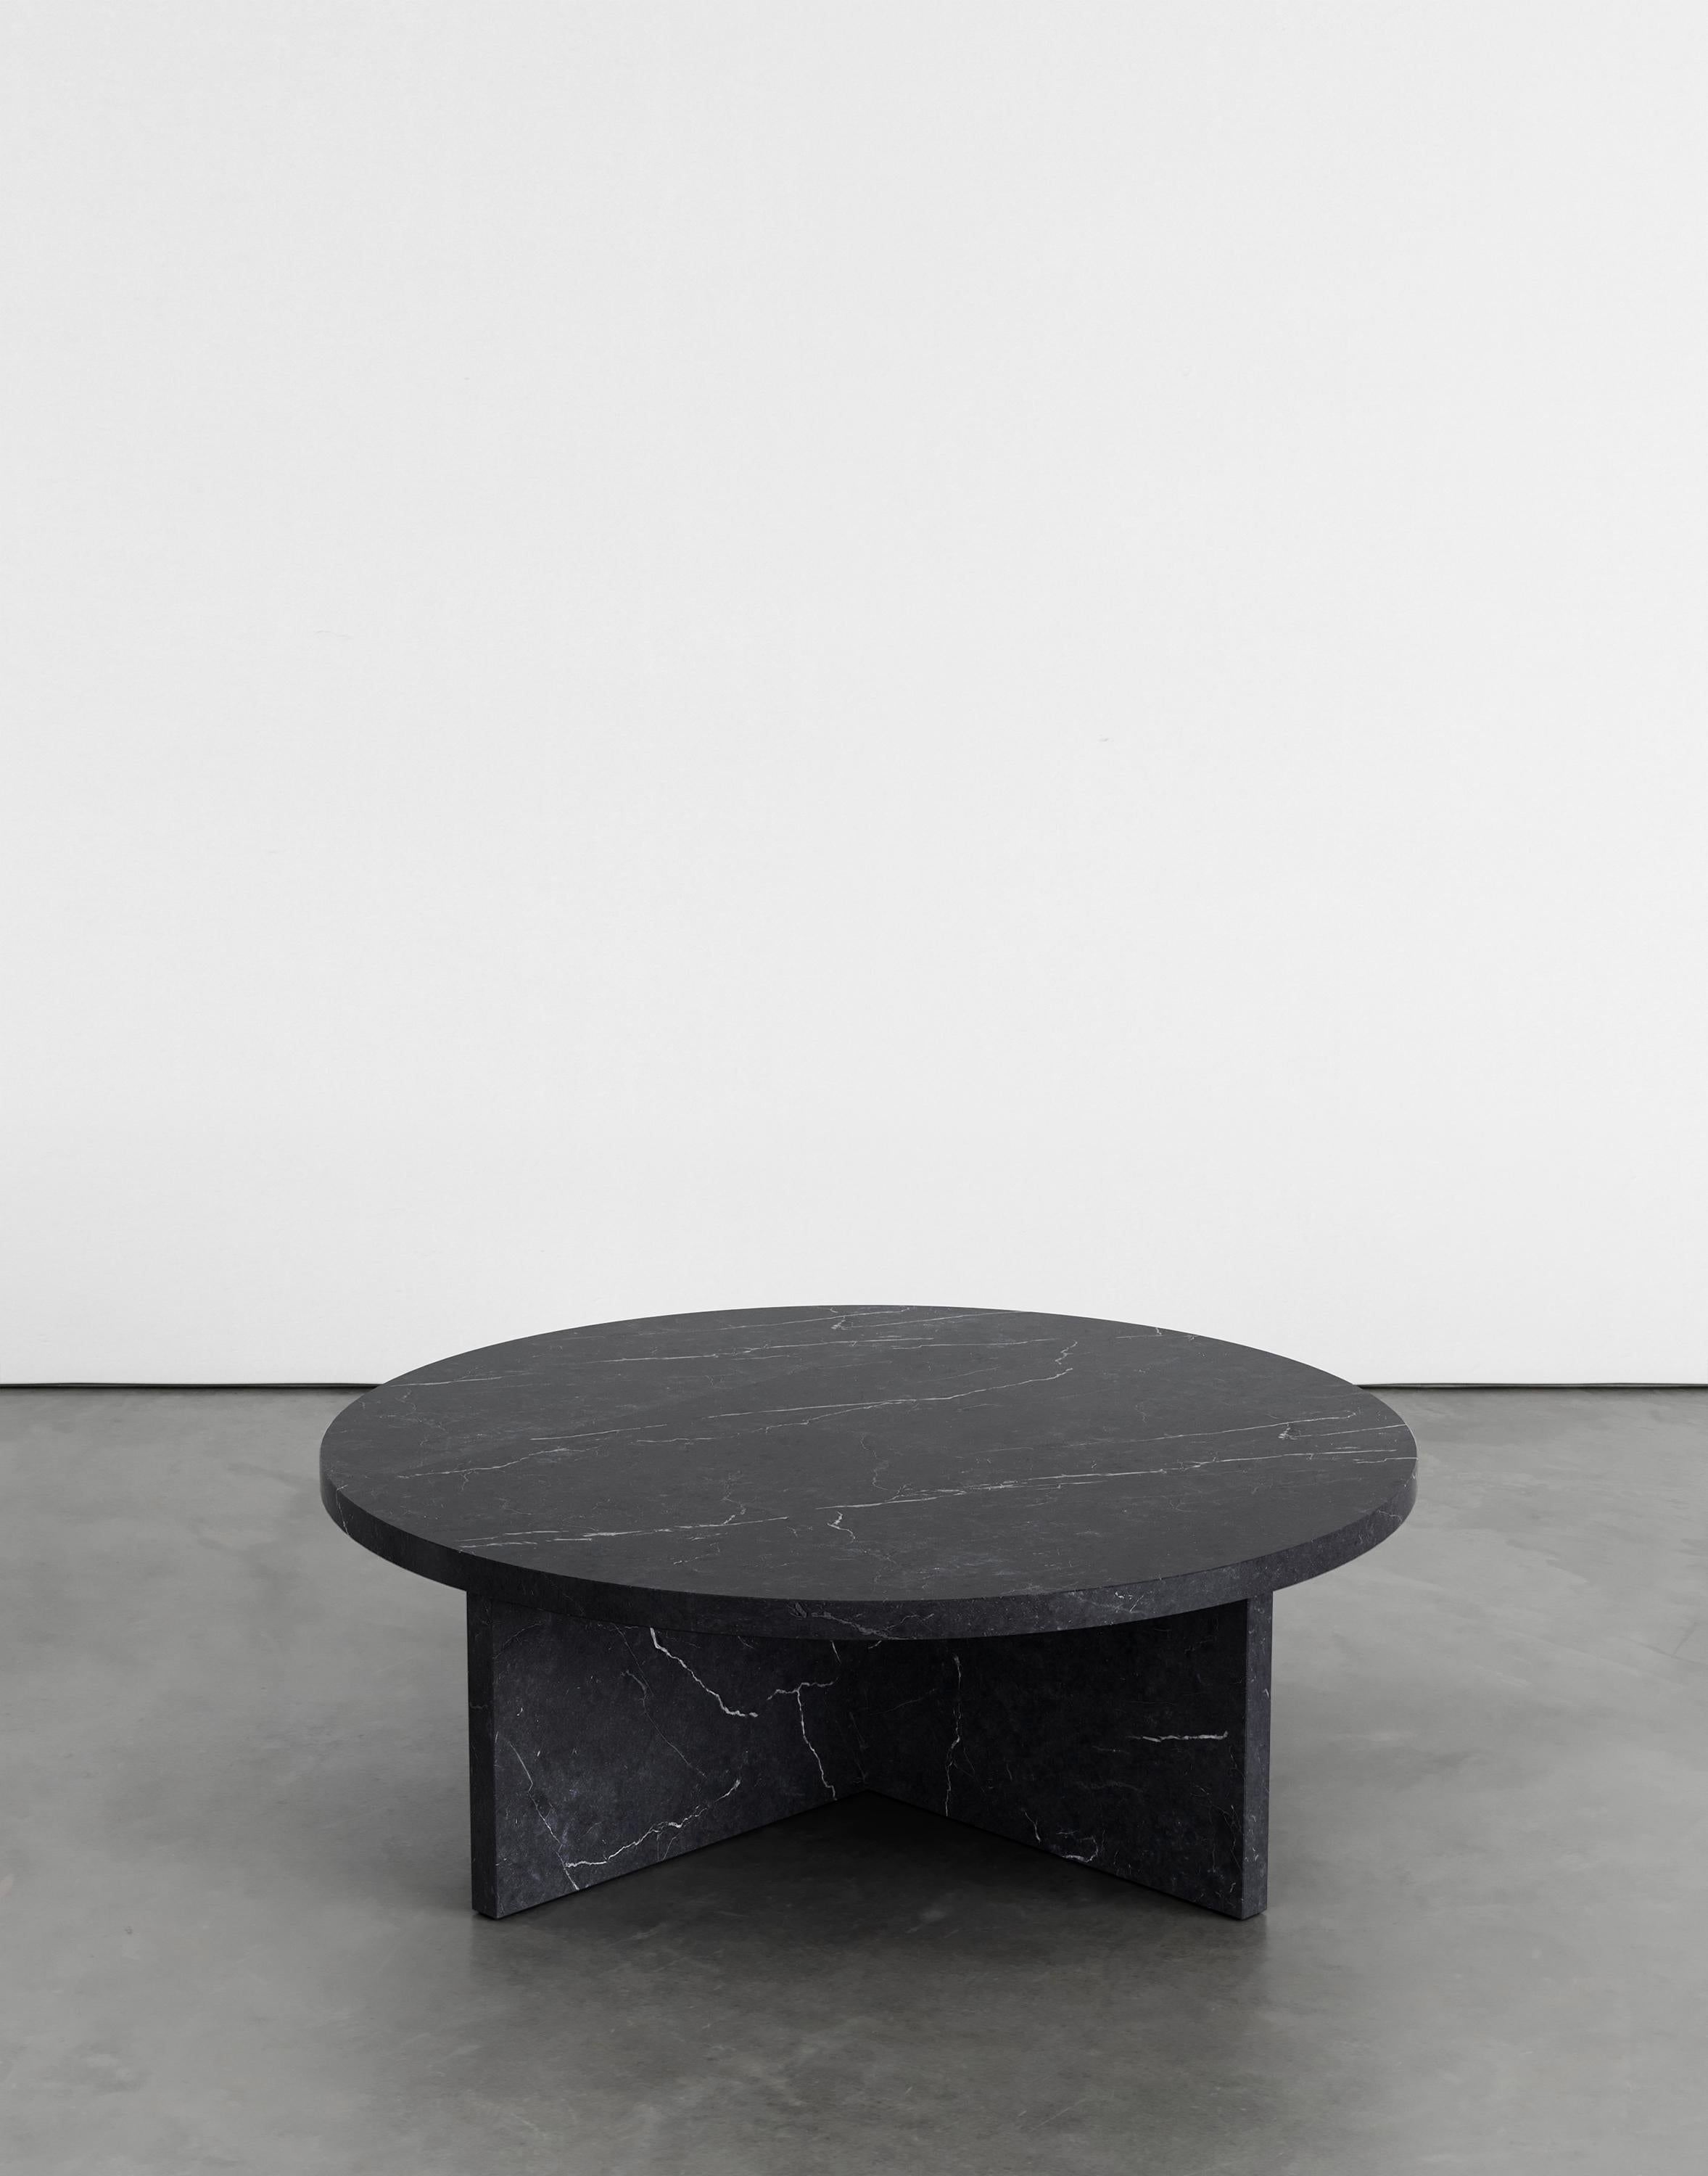 Rosa 90 coffee table by Agglomerati
Dimensions: D 90 x H 30 cm
Materials: Nero Marquina marble
Available in other stones.

Rosa Coffee Table celebrates simplicity. It has striking geometric proportions that generate a harmonious